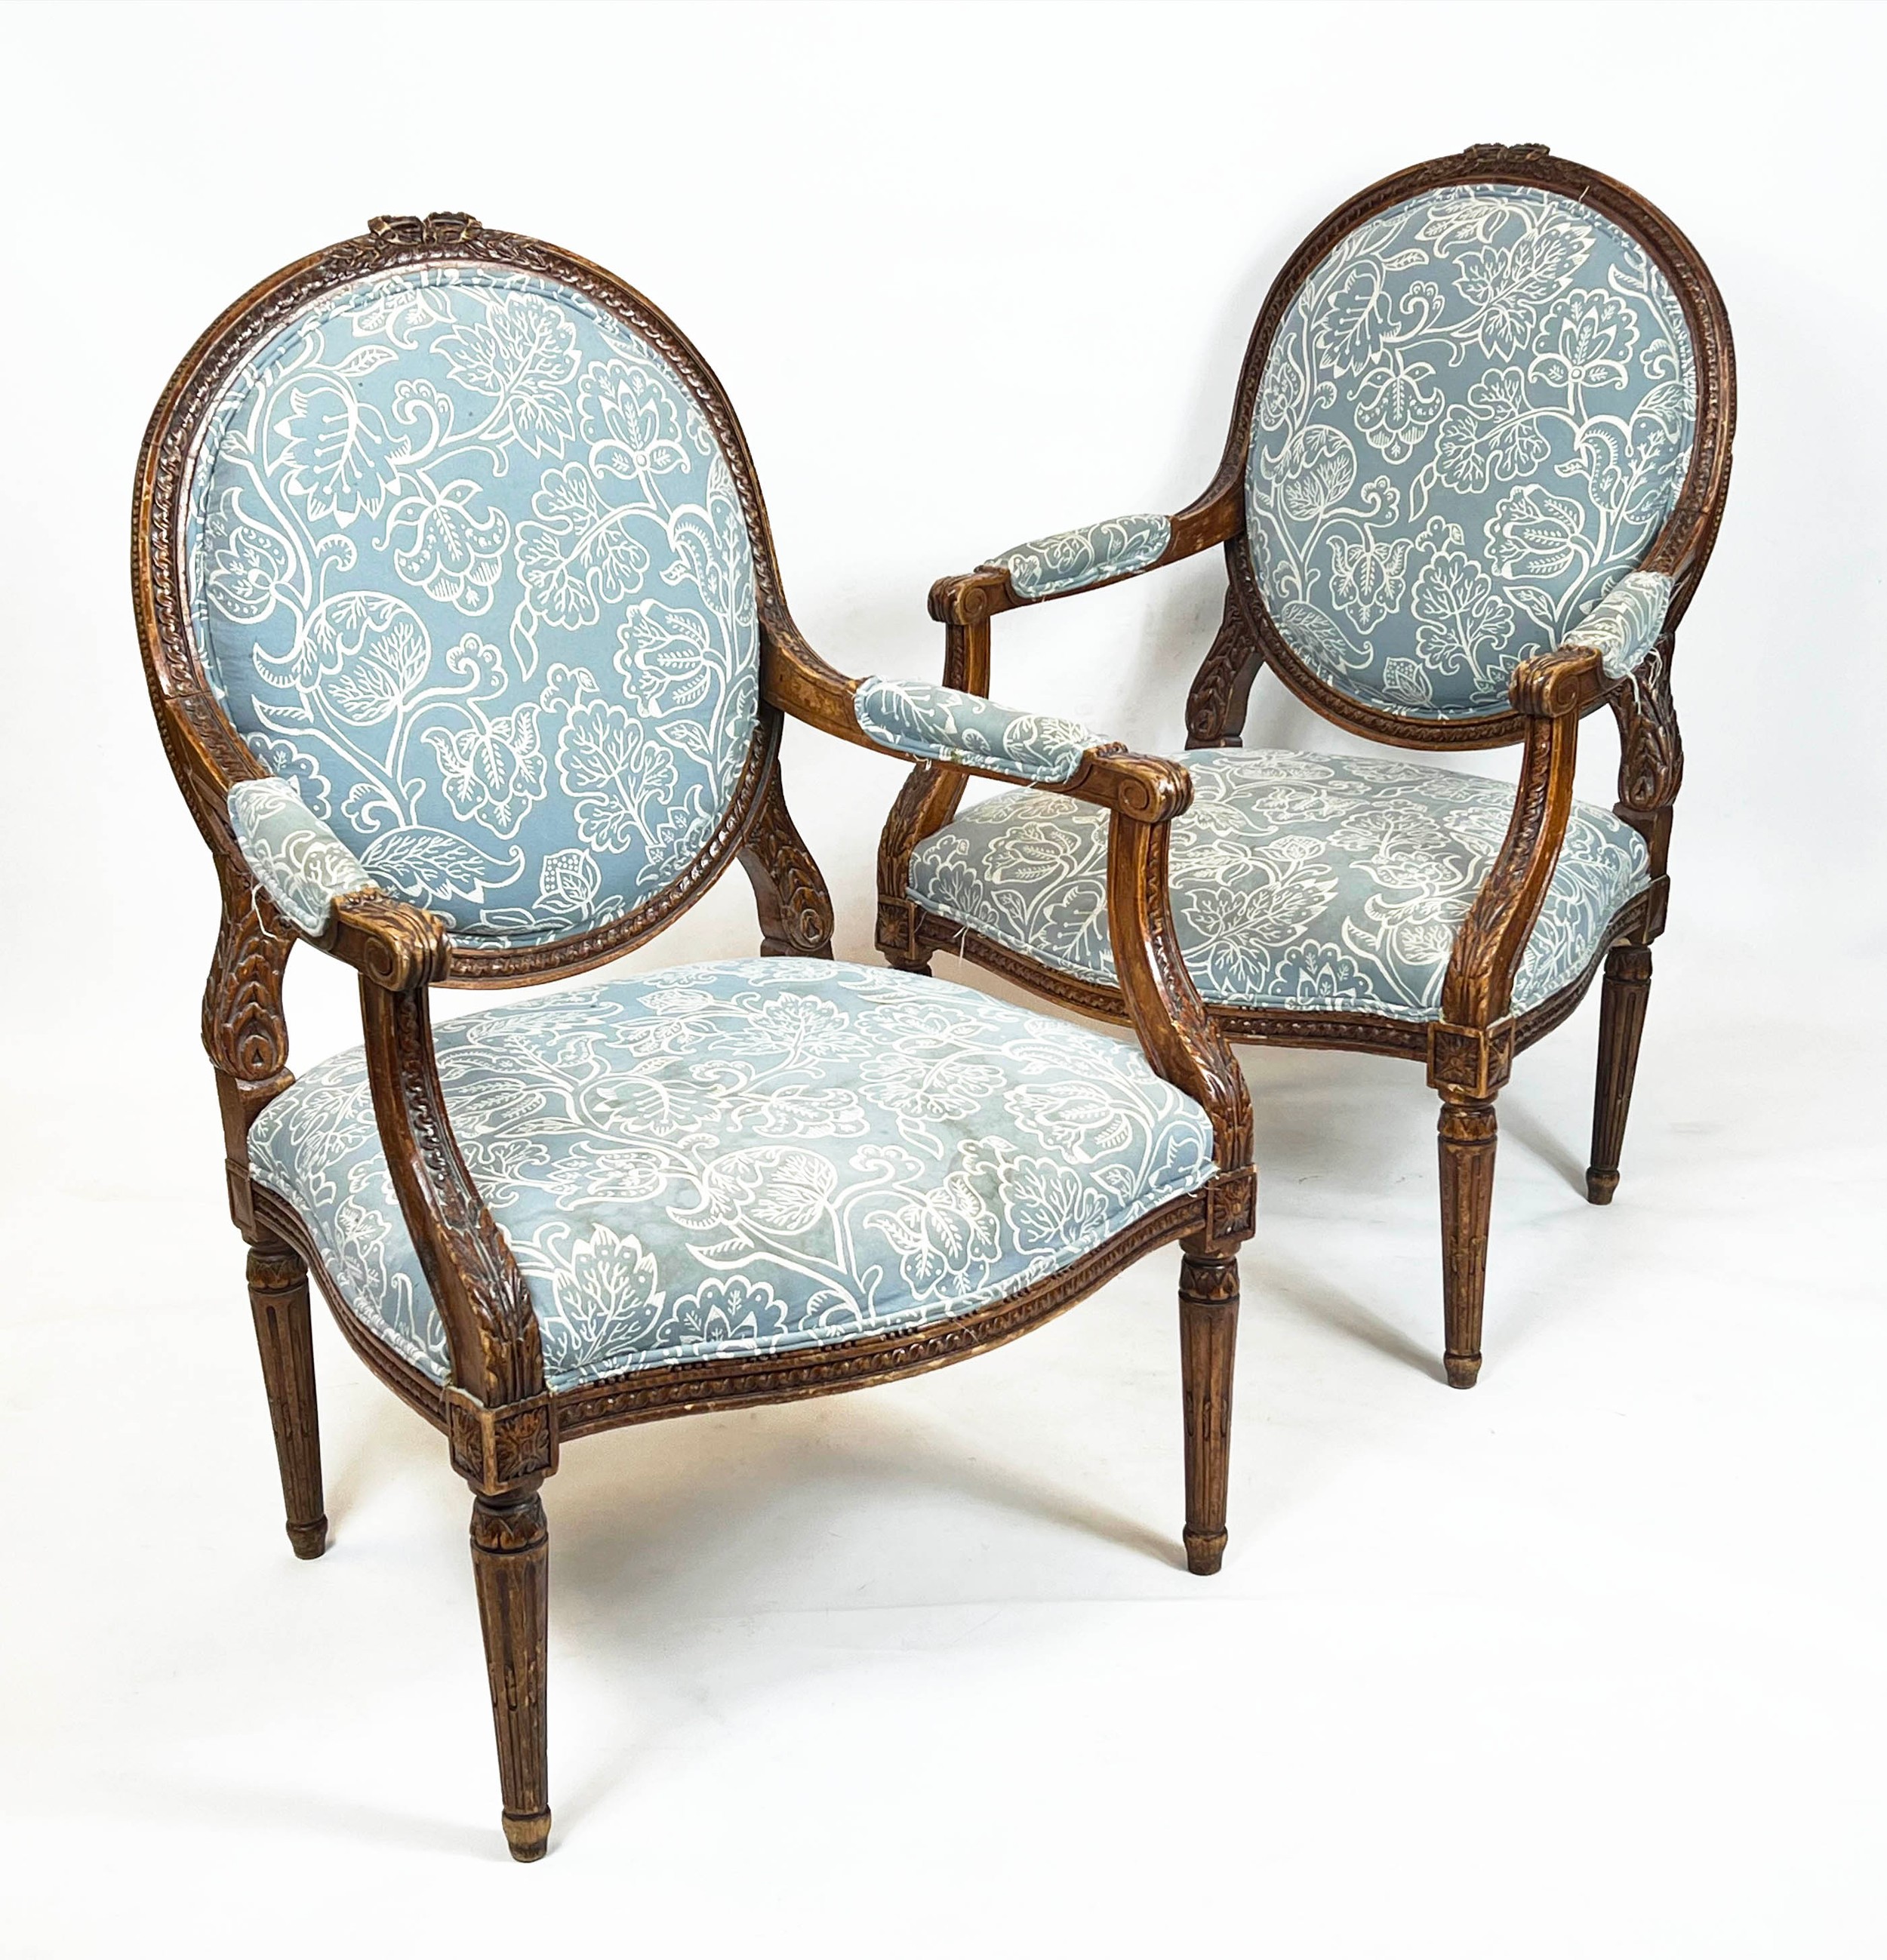 FAUTEUILS, 103cm H x 66cm, a pair, late 19th/early 20th century French beechwood in patterned blue